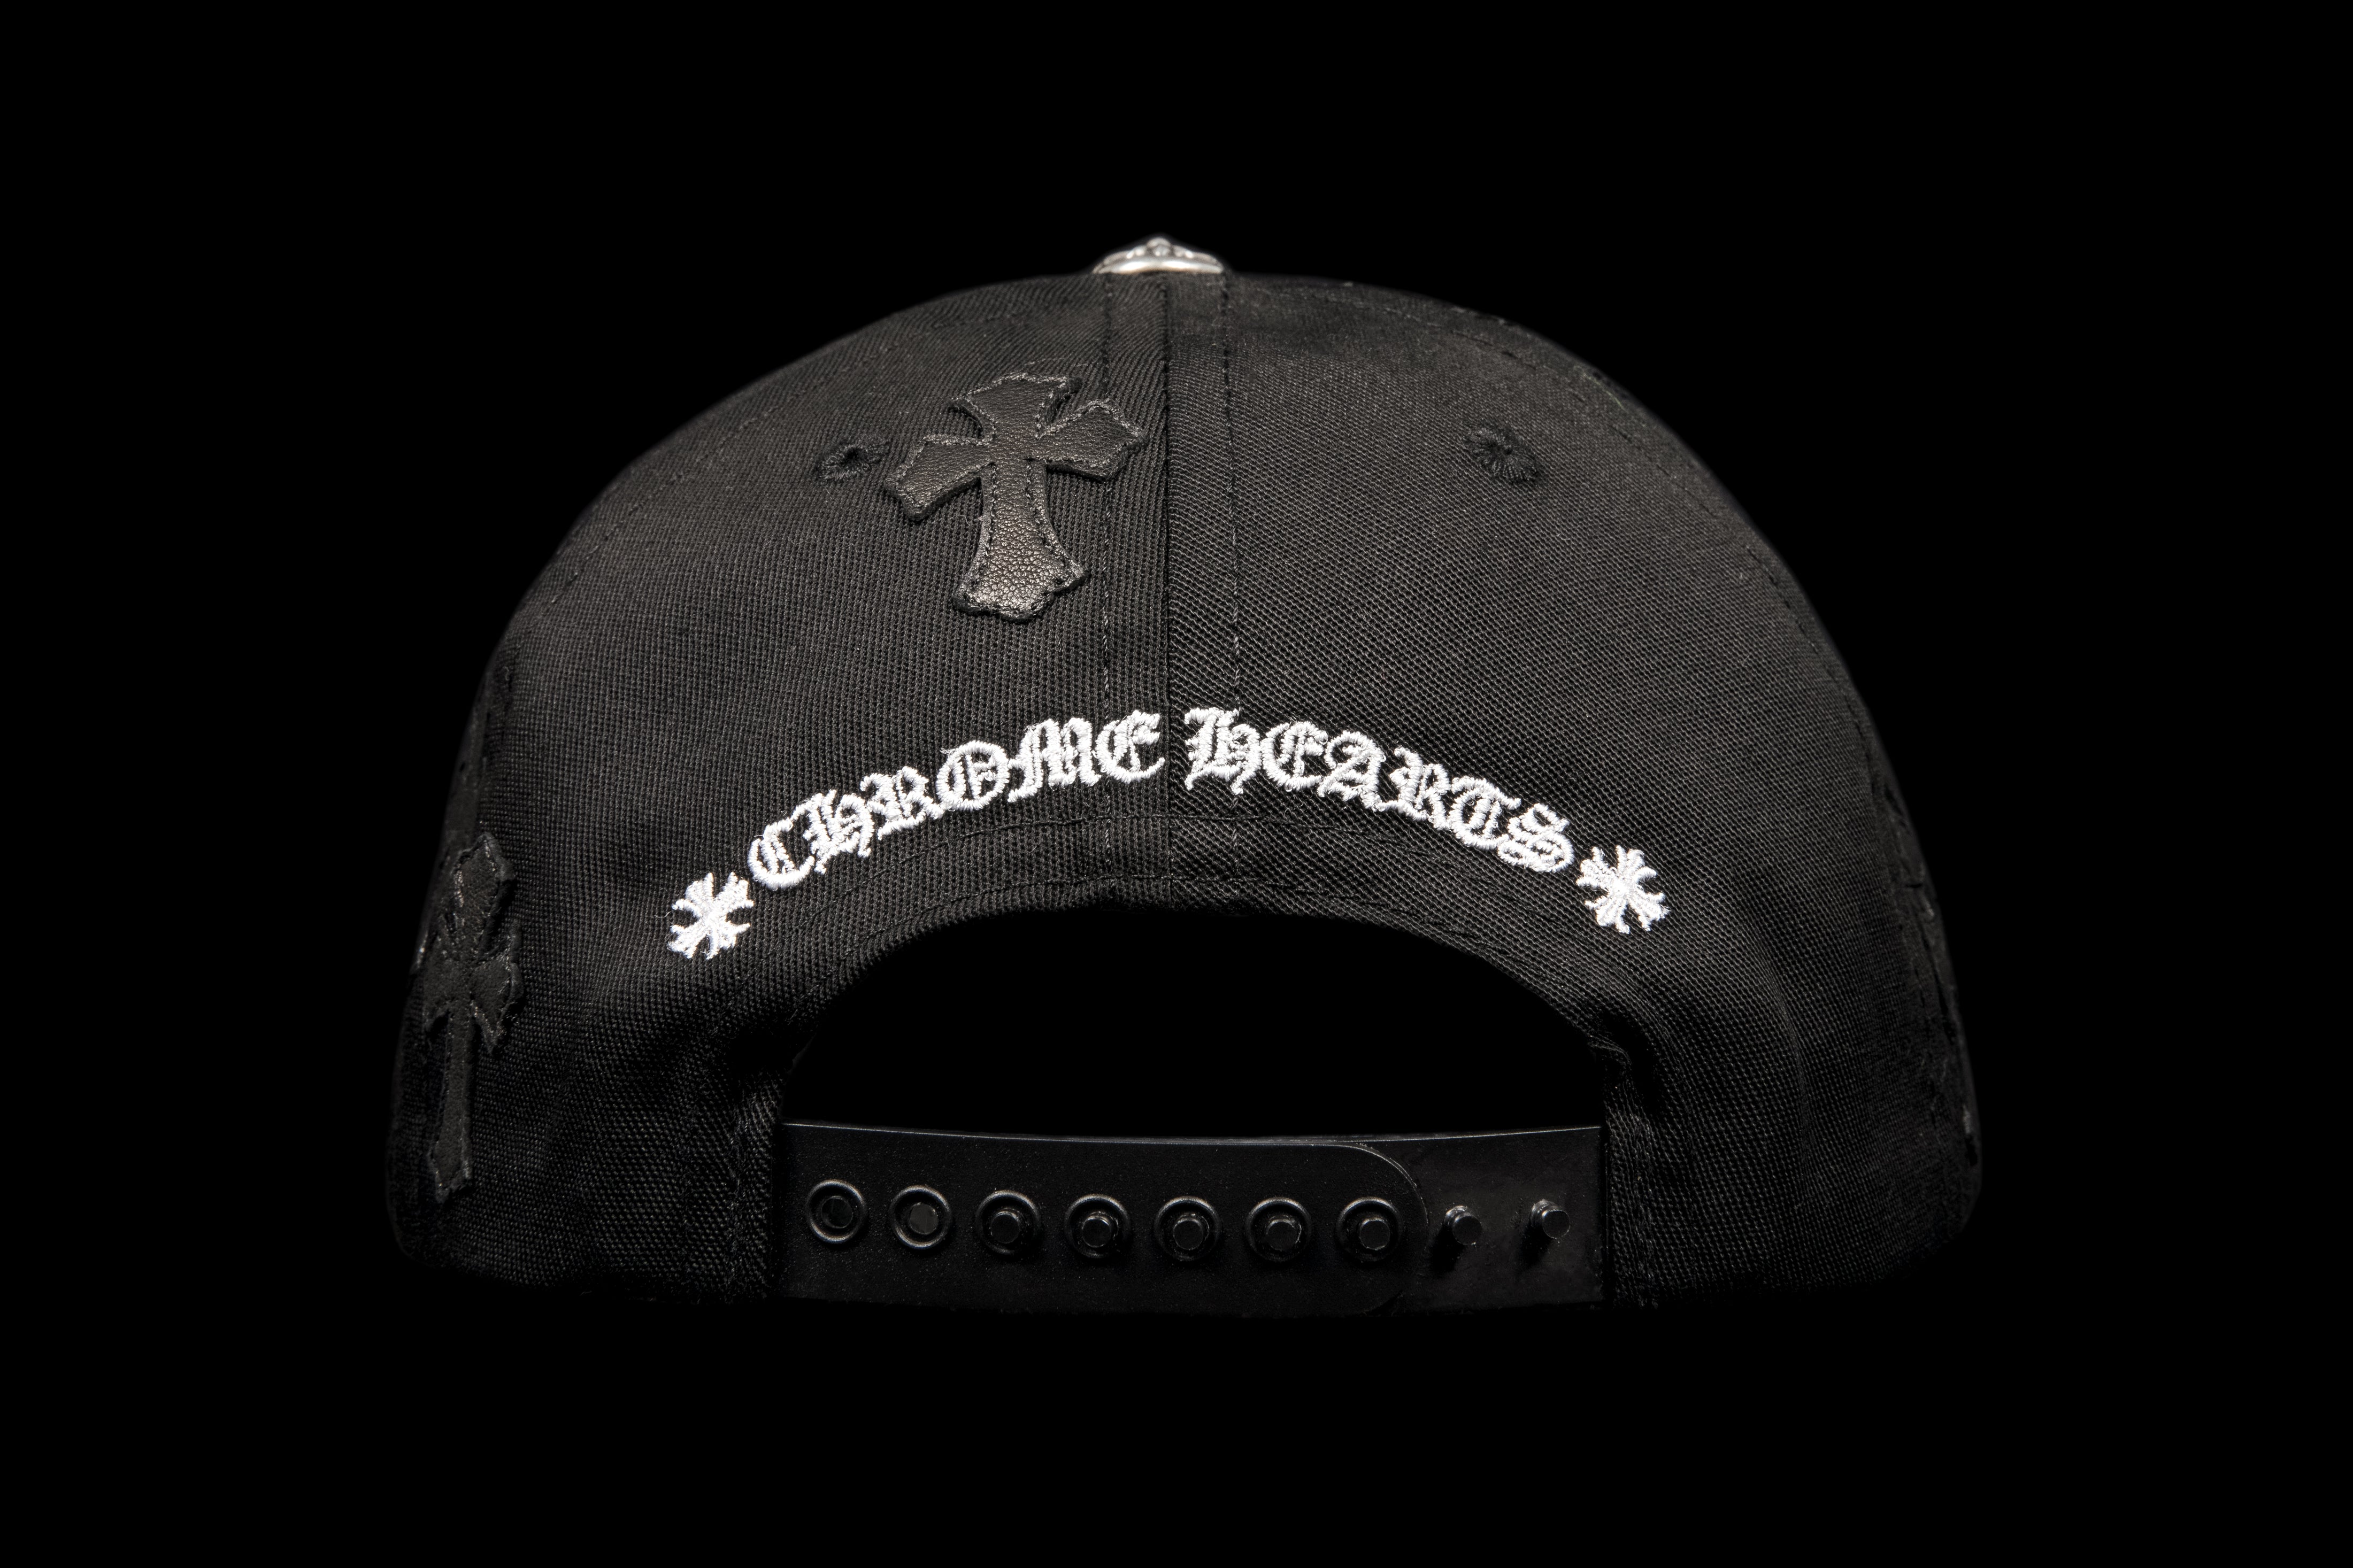 CHROME HEARTS LEATHER CROSS PATCH SNAPBACK HAT